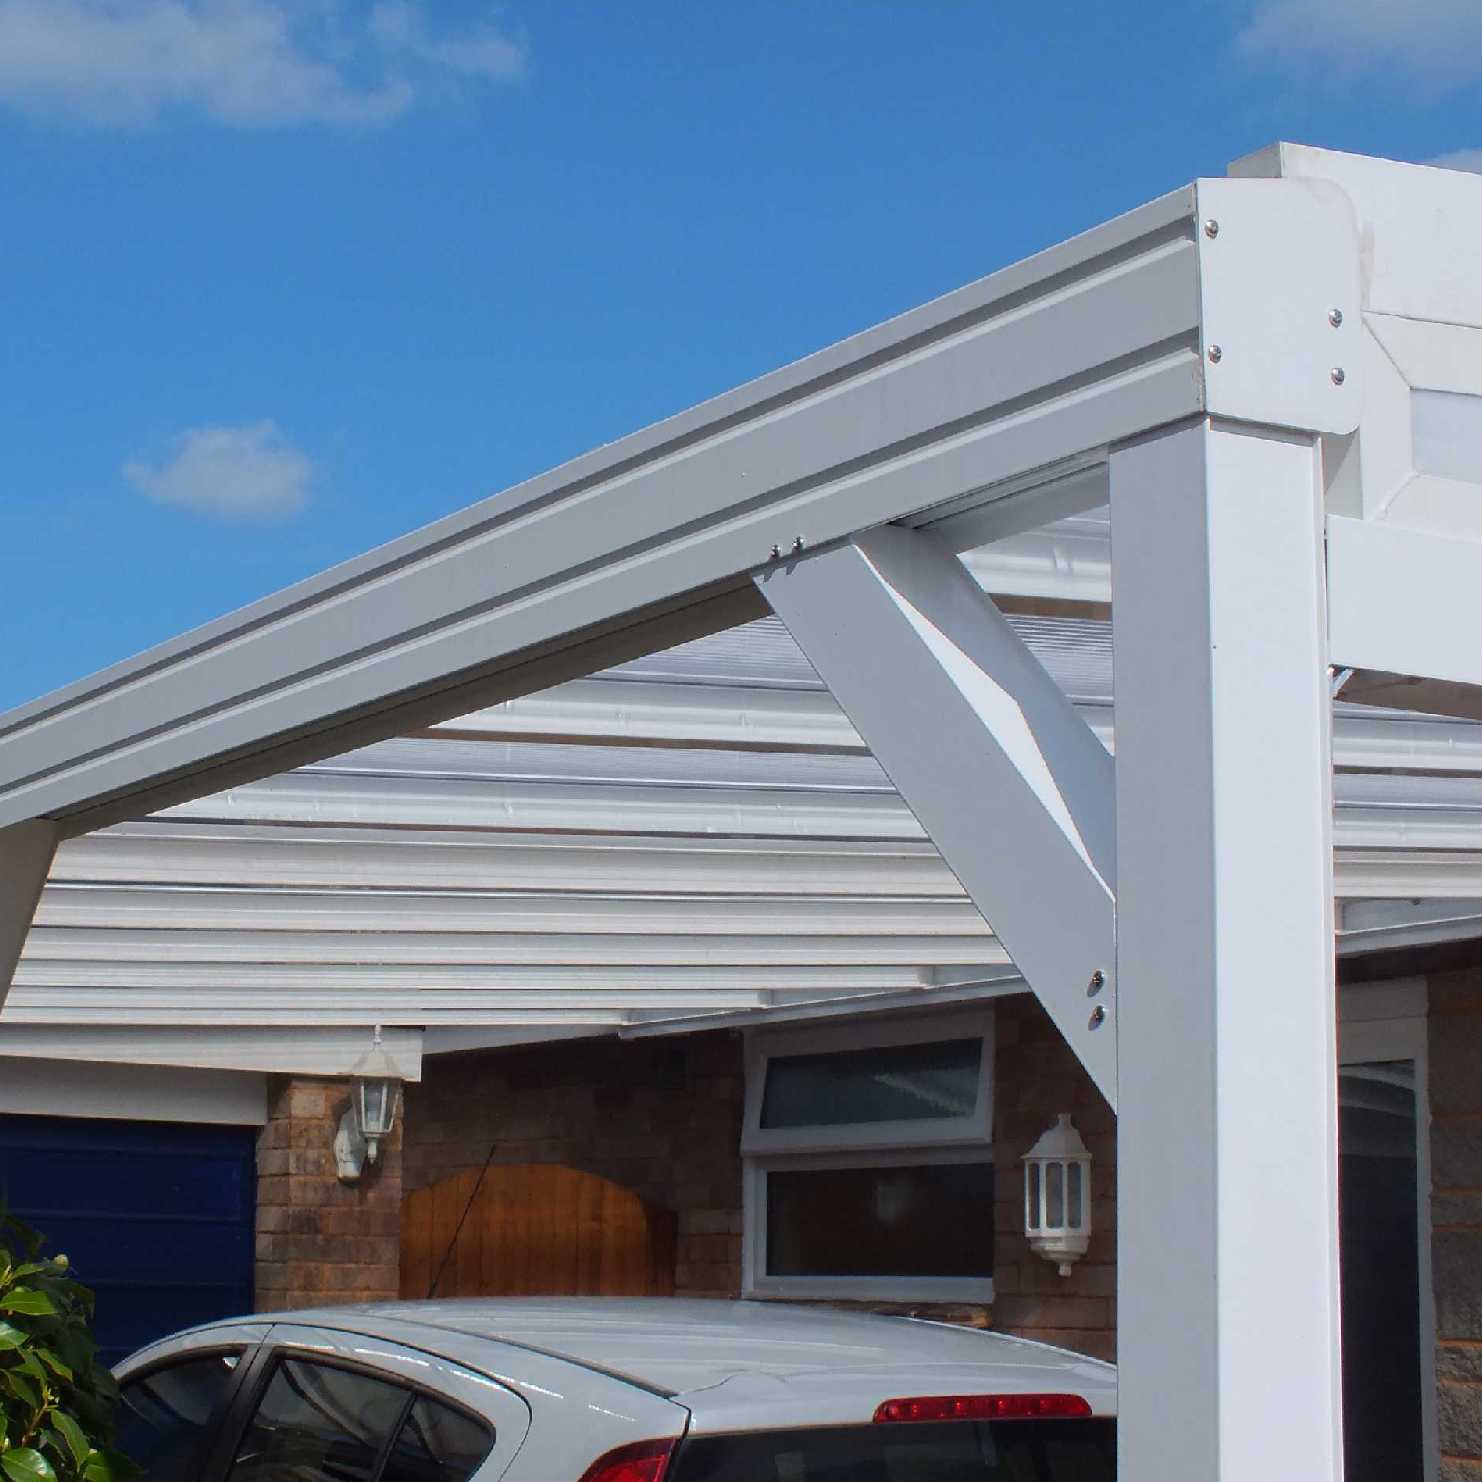 Buy Omega Smart Lean-To Canopy, White with 16mm Polycarbonate Glazing - 8.4m (W) x 3.5m (P), (4) Supporting Posts online today